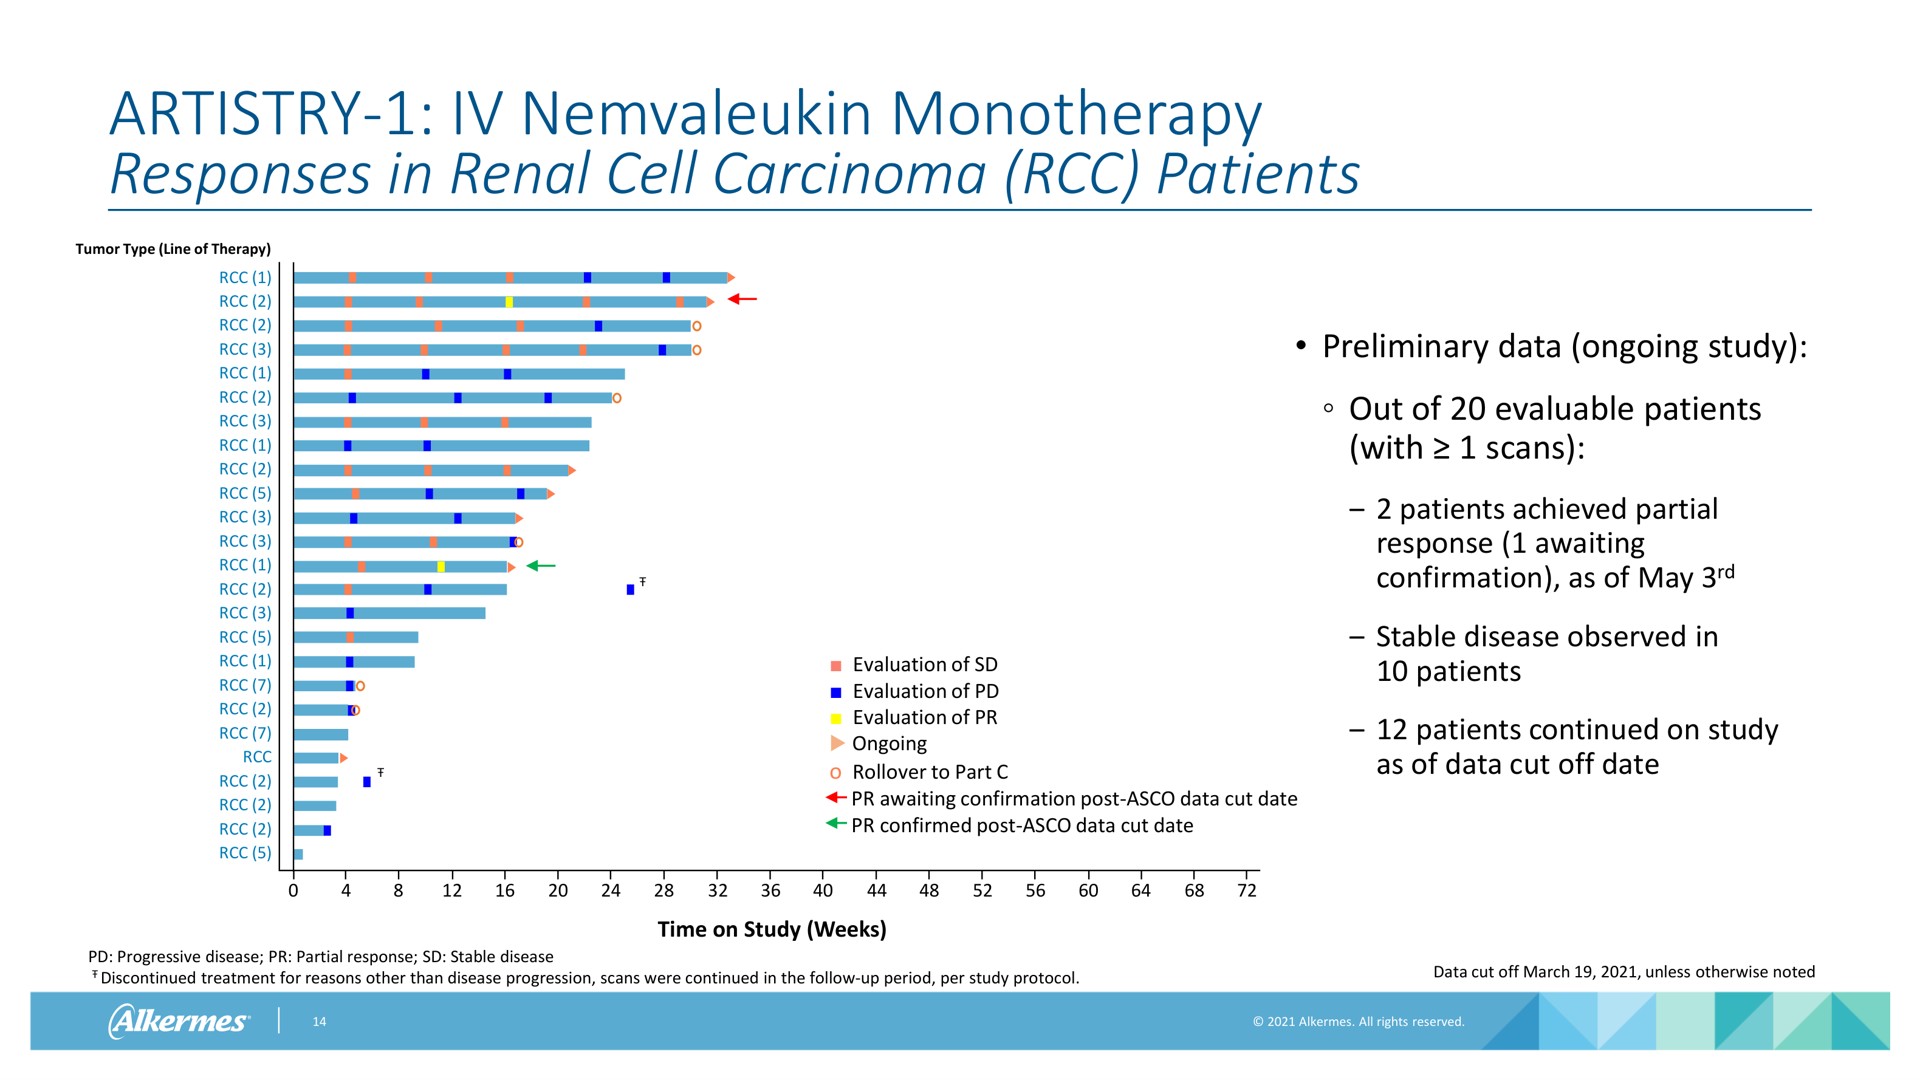 artistry responses in renal cell carcinoma patients | Alkermes